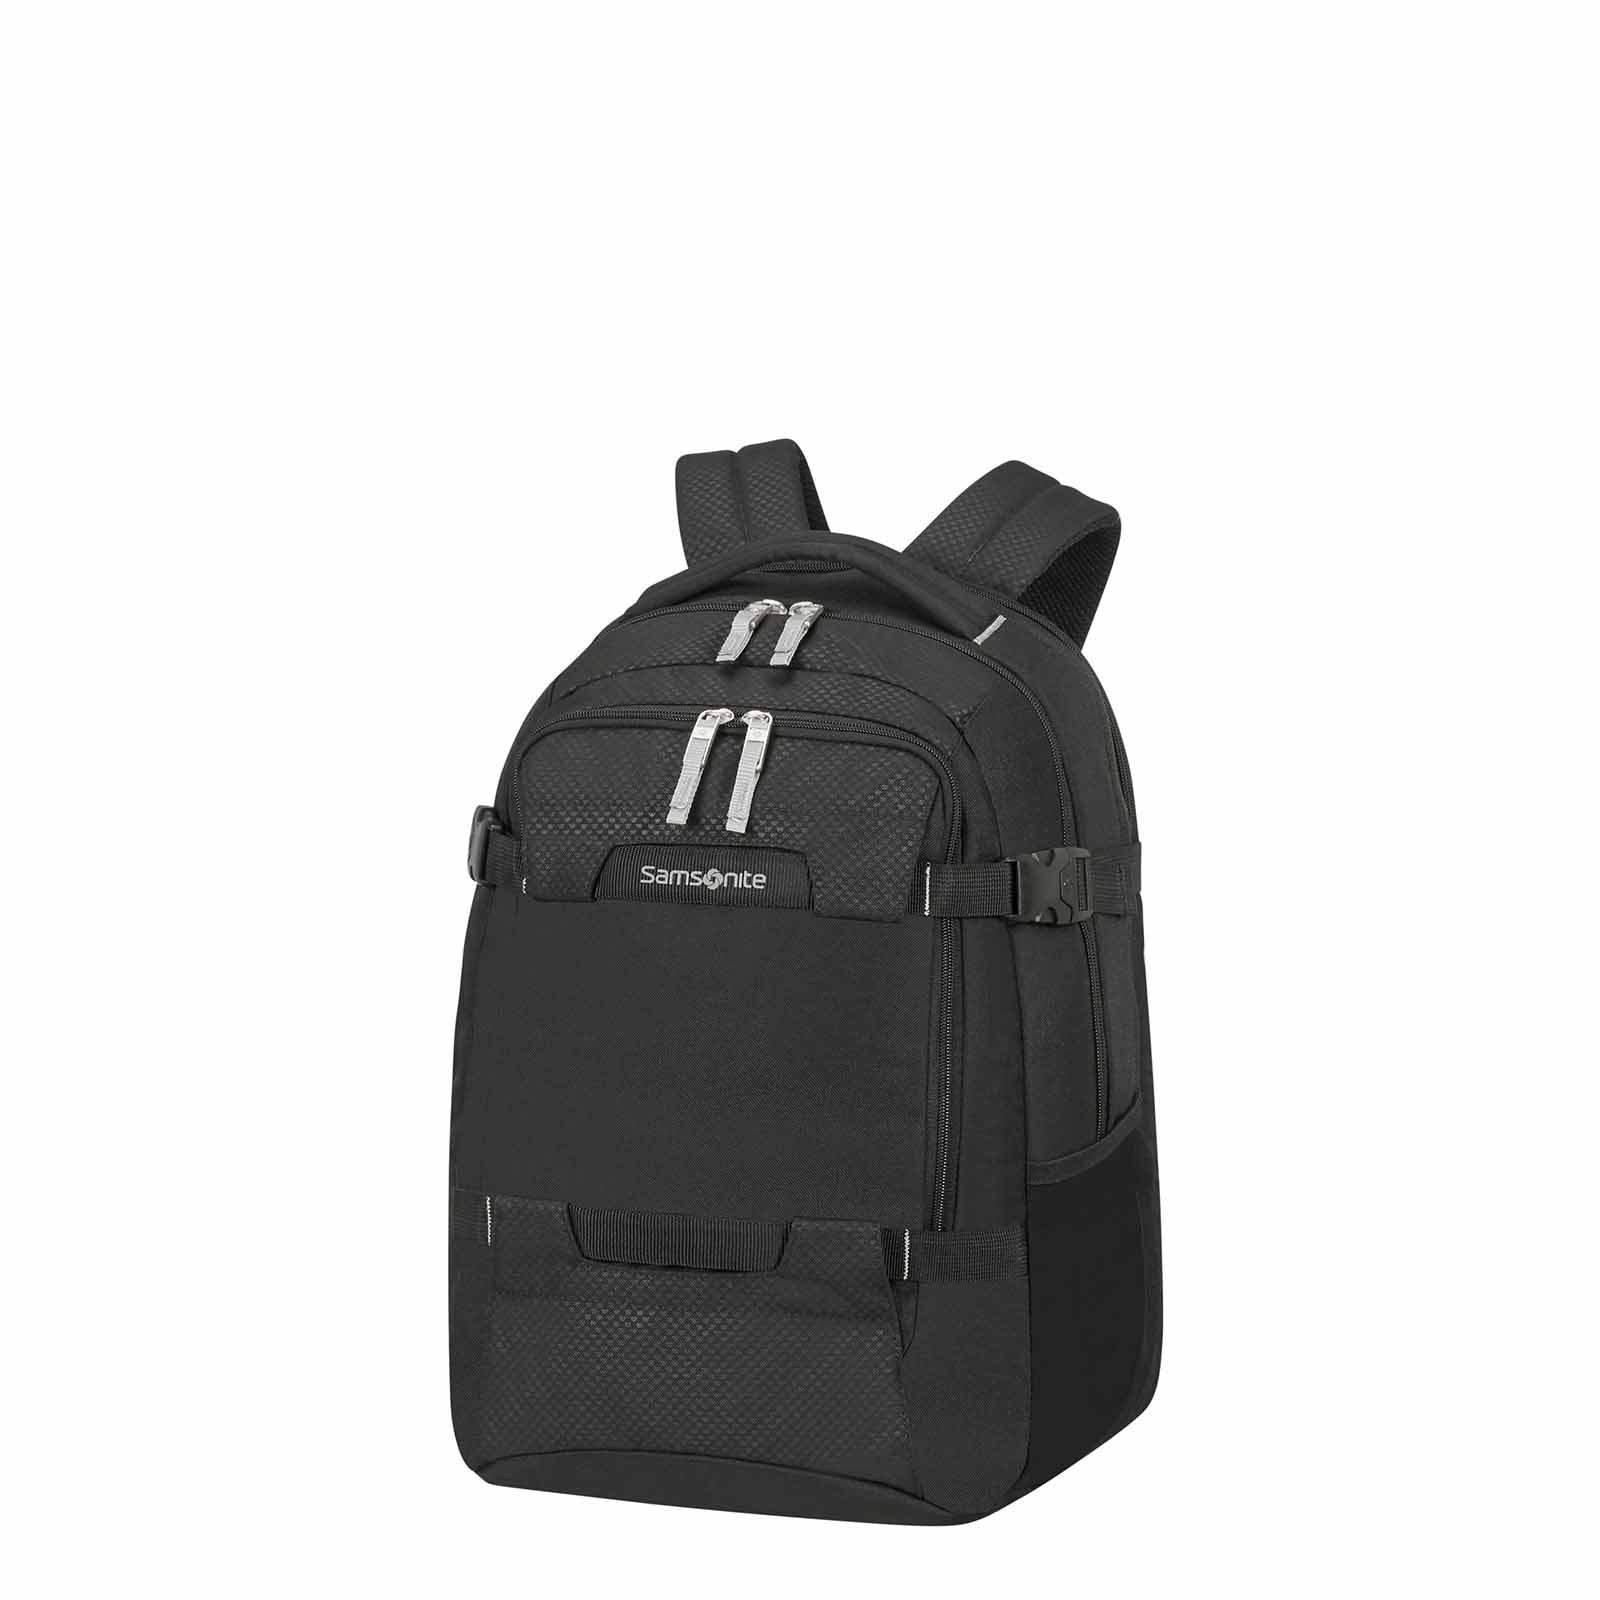 Samsonite-Sonora-15-Inch-Laptop-Backpack-Black-Front-Angle